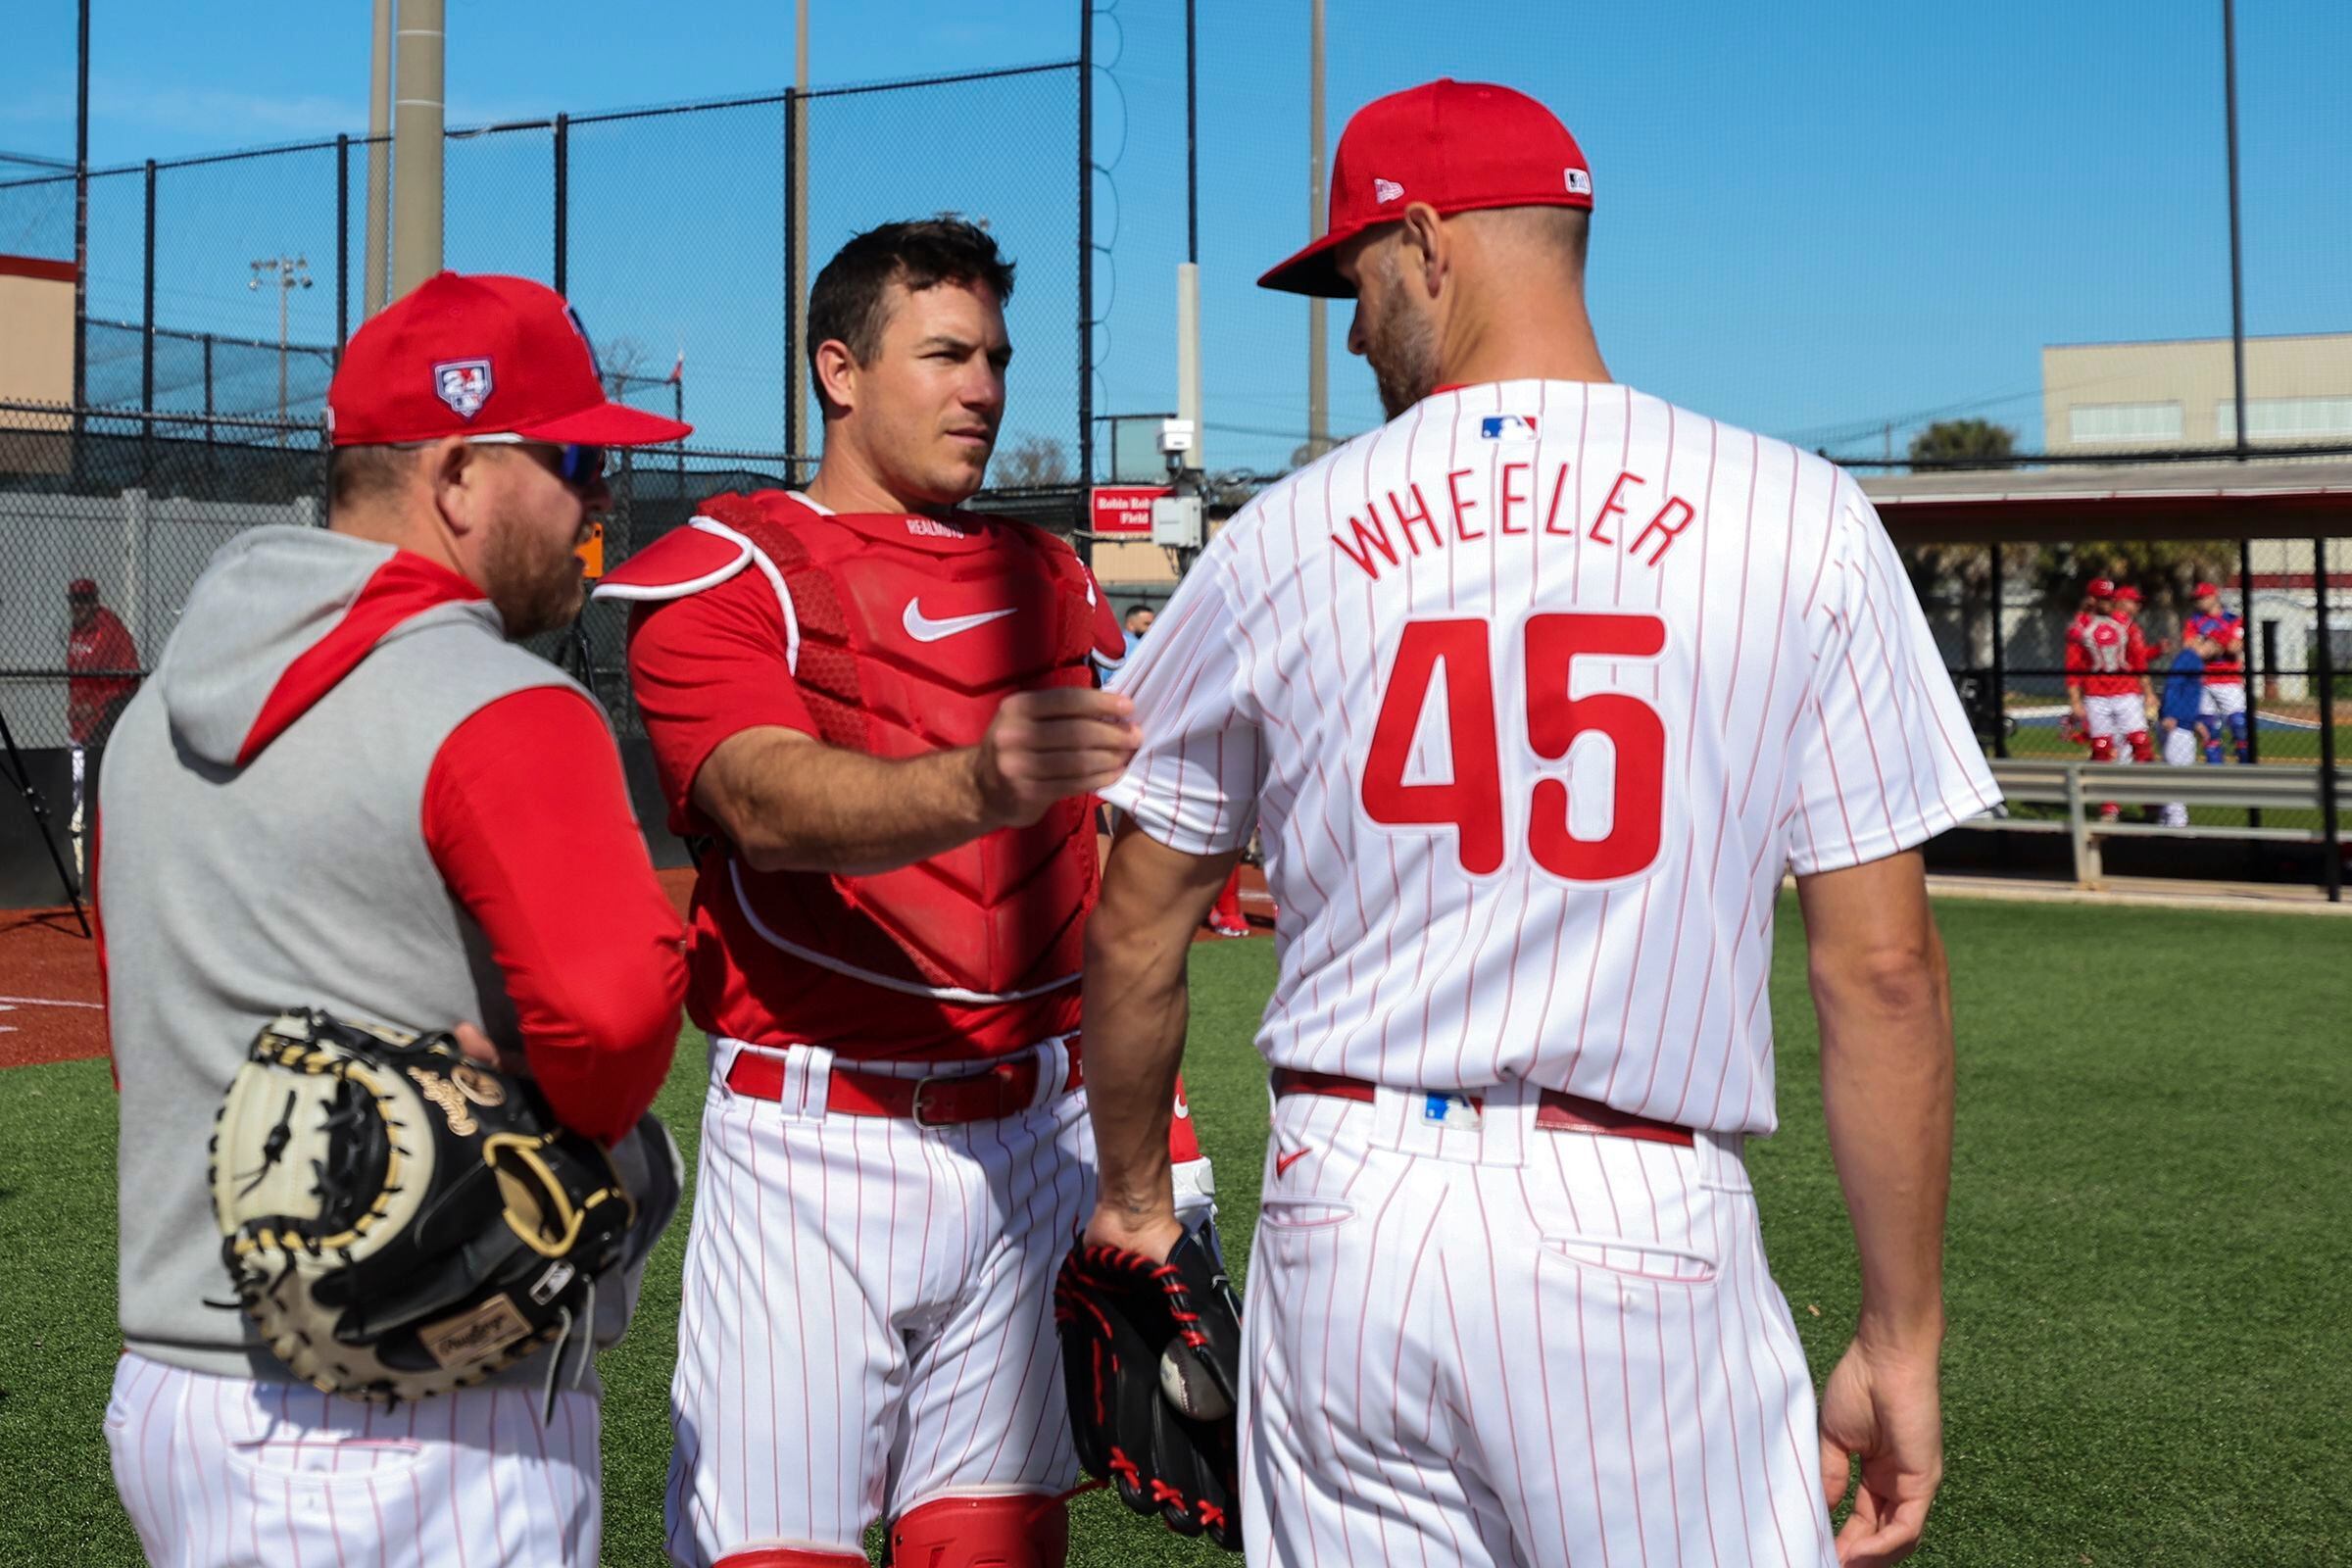 new uniforms have some phillies pining for the old ones. others like them: ‘i feel huge in the jerseys.’